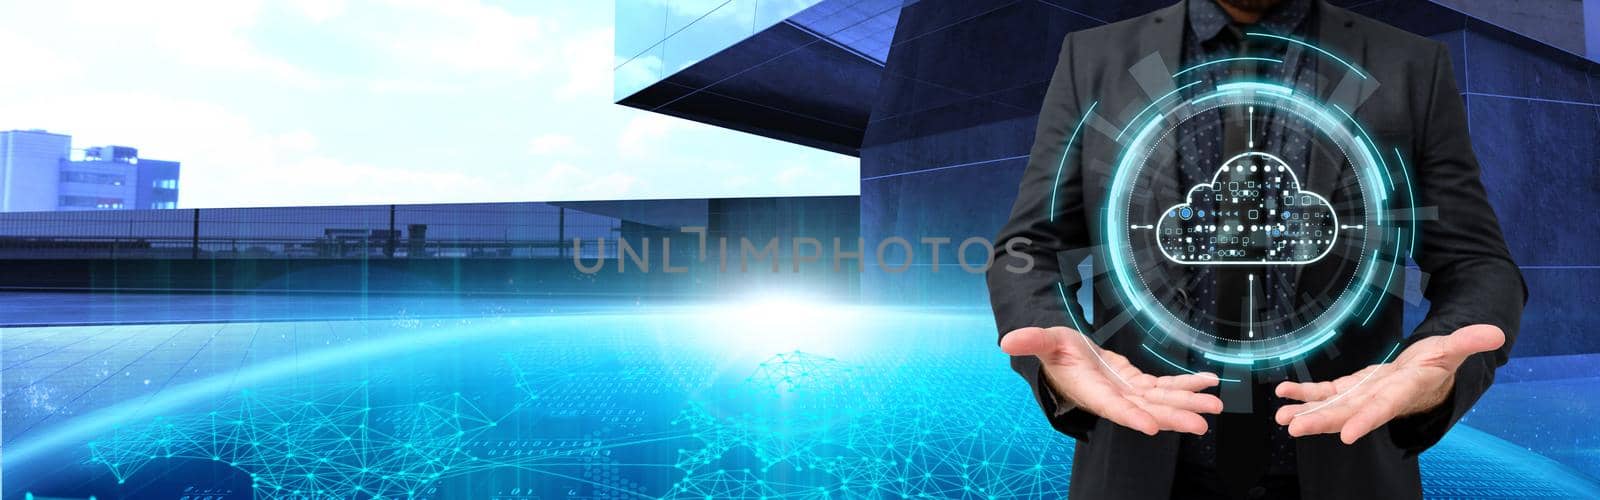 Picture Of Businessman Presenting With Both Open Hands Showing Amazing Futuristic Technology. Employee Discussing News Performing Wonderful Modern Automation. by nialowwa